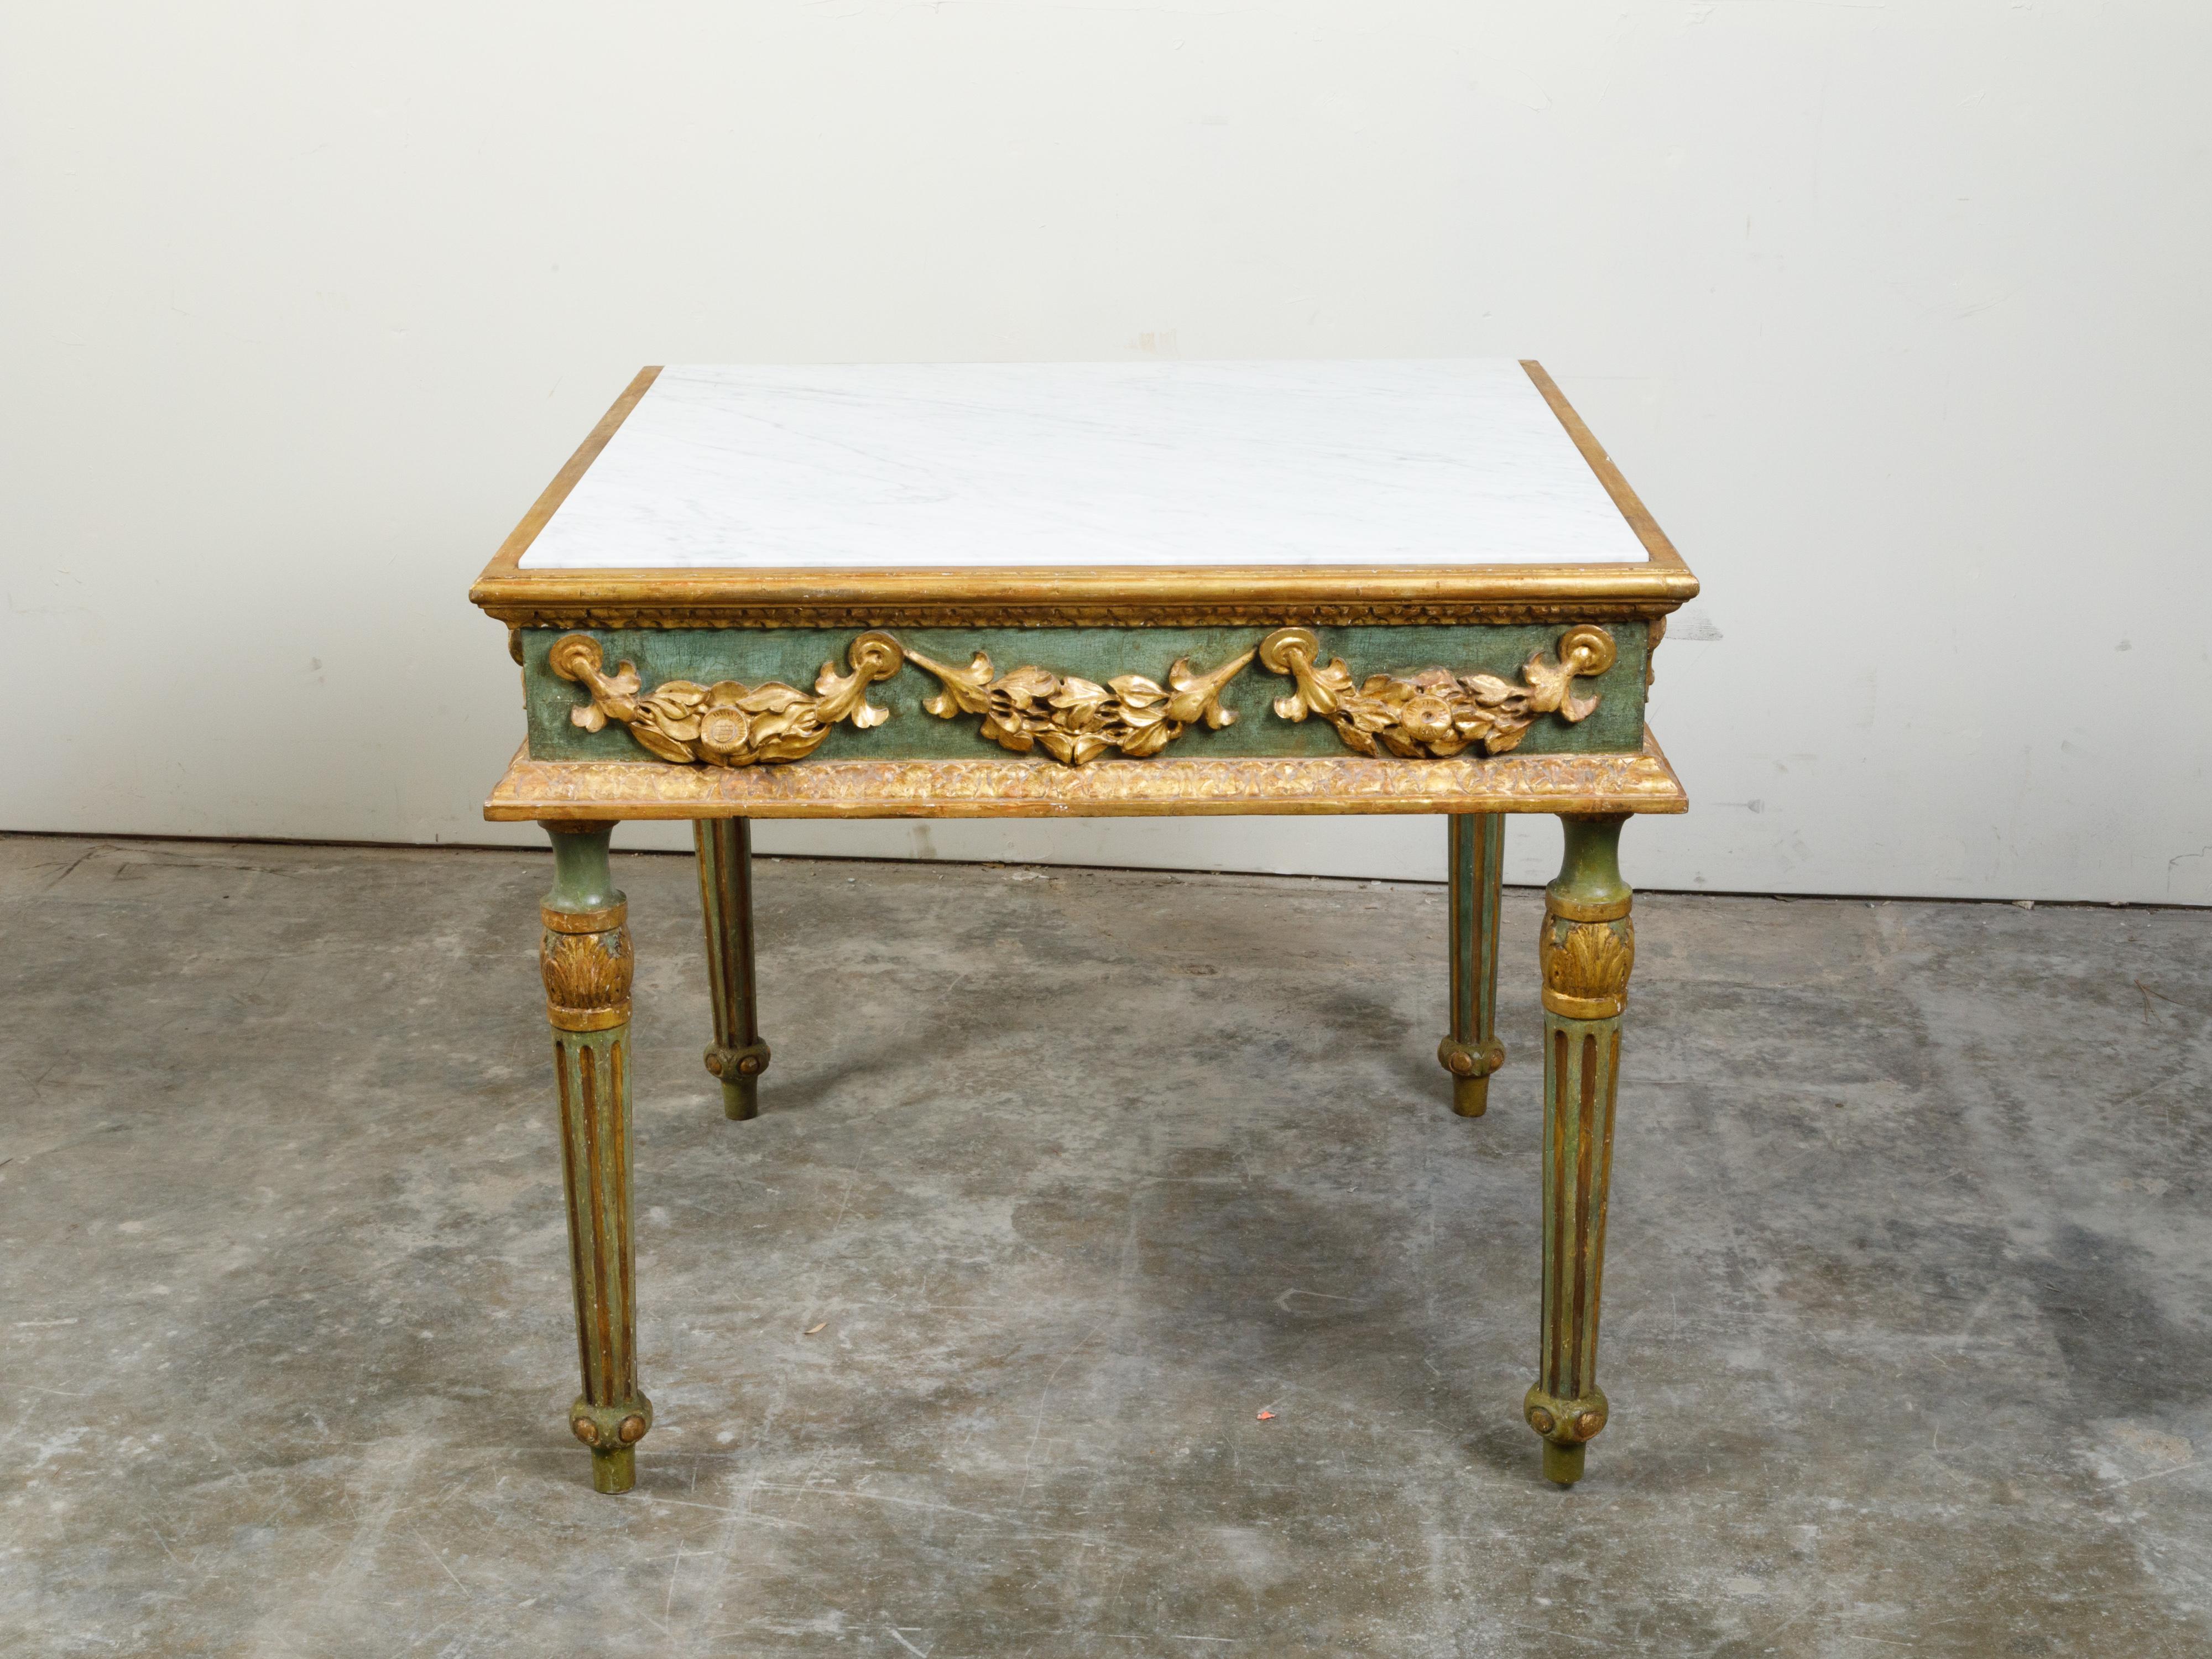 Italian Neoclassical Period 18th Century Center Table with Carved Gilt Garlands For Sale 1